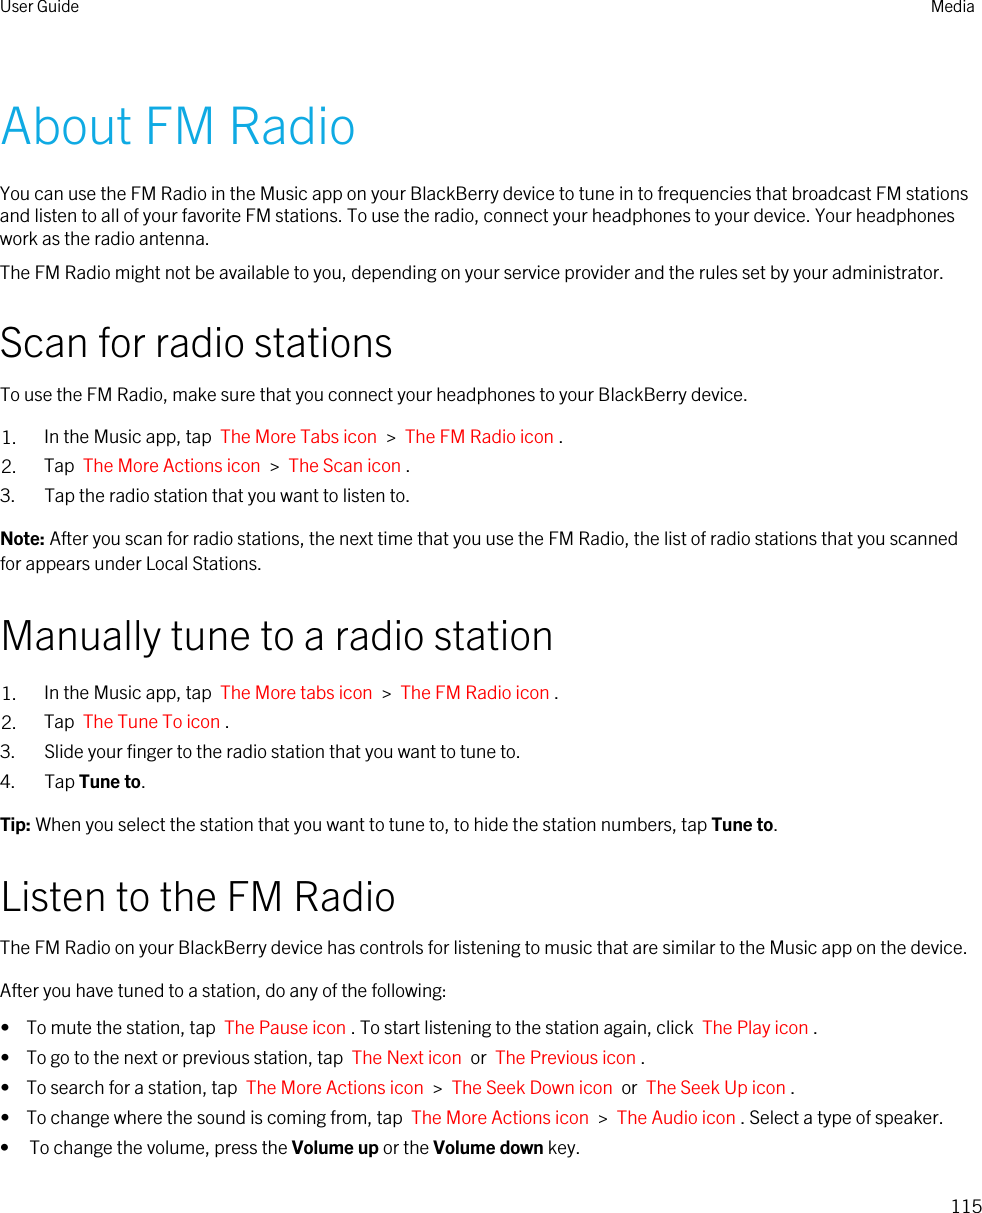 About FM RadioYou can use the FM Radio in the Music app on your BlackBerry device to tune in to frequencies that broadcast FM stations and listen to all of your favorite FM stations. To use the radio, connect your headphones to your device. Your headphones work as the radio antenna.The FM Radio might not be available to you, depending on your service provider and the rules set by your administrator.Scan for radio stationsTo use the FM Radio, make sure that you connect your headphones to your BlackBerry device.1. In the Music app, tap  The More Tabs icon  &gt;  The FM Radio icon .2. Tap  The More Actions icon  &gt;  The Scan icon .3. Tap the radio station that you want to listen to.Note: After you scan for radio stations, the next time that you use the FM Radio, the list of radio stations that you scanned for appears under Local Stations.Manually tune to a radio station1. In the Music app, tap  The More tabs icon  &gt;  The FM Radio icon .2. Tap  The Tune To icon .3. Slide your finger to the radio station that you want to tune to.4. Tap Tune to.Tip: When you select the station that you want to tune to, to hide the station numbers, tap Tune to.Listen to the FM RadioThe FM Radio on your BlackBerry device has controls for listening to music that are similar to the Music app on the device.After you have tuned to a station, do any of the following:•  To mute the station, tap  The Pause icon . To start listening to the station again, click  The Play icon .•  To go to the next or previous station, tap  The Next icon  or  The Previous icon .•  To search for a station, tap  The More Actions icon  &gt;  The Seek Down icon  or  The Seek Up icon .•  To change where the sound is coming from, tap  The More Actions icon  &gt;  The Audio icon . Select a type of speaker.• To change the volume, press the Volume up or the Volume down key.User Guide Media115